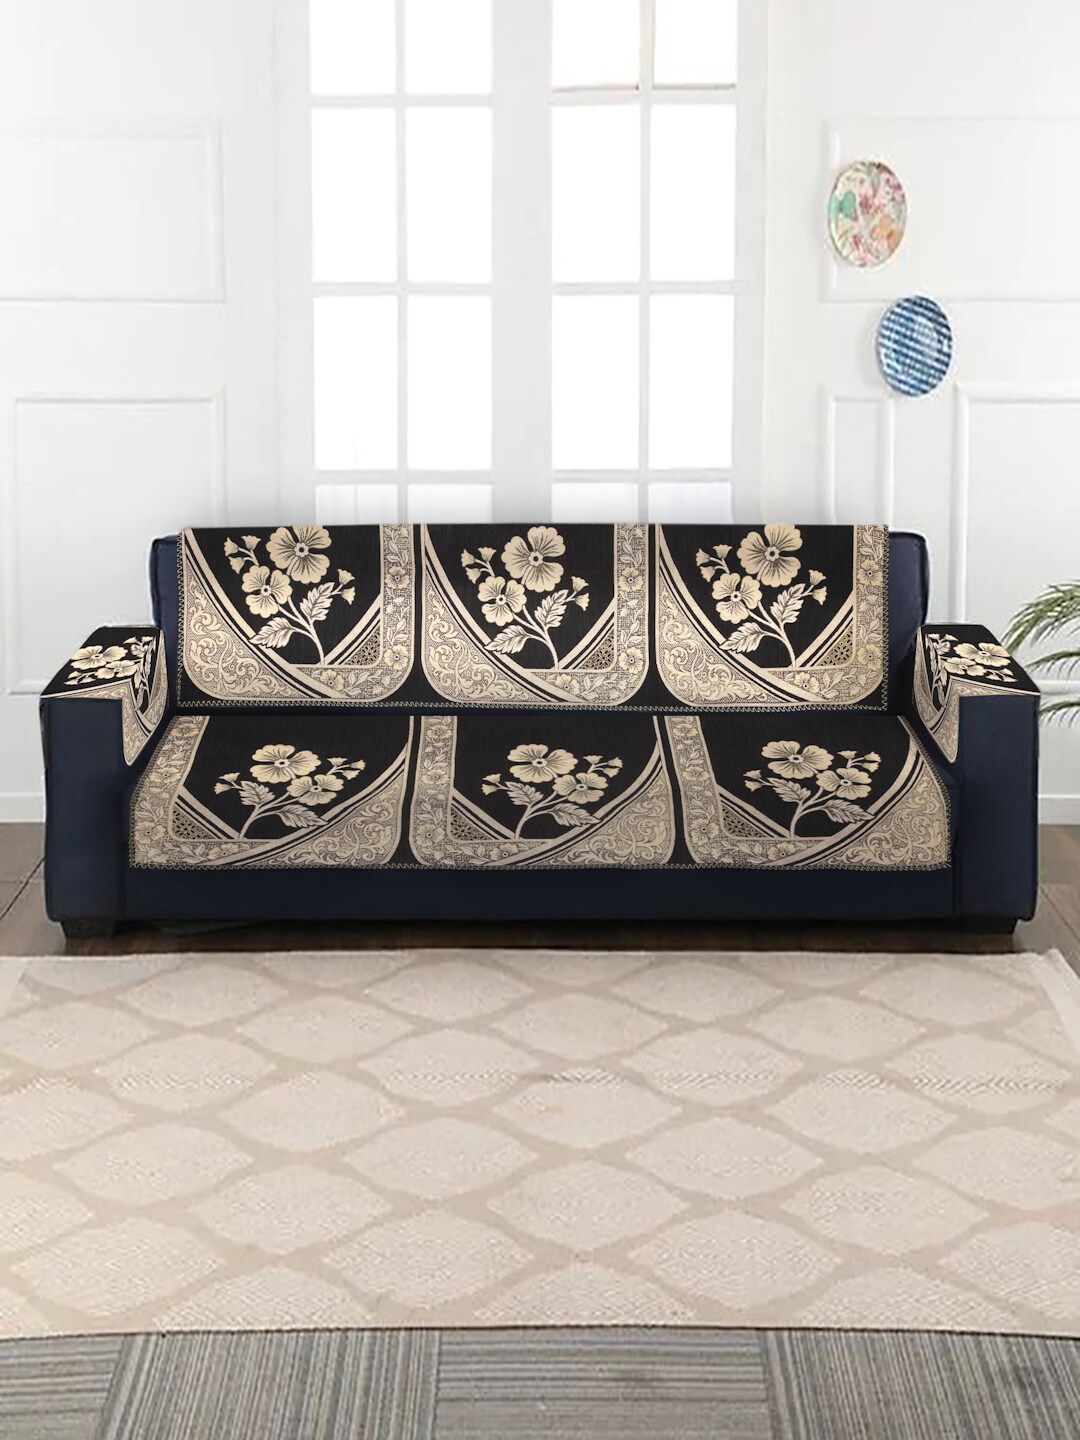 MULTITEX Black & Beige Floral Set of 16-Pieces Sofa Covers Price in India